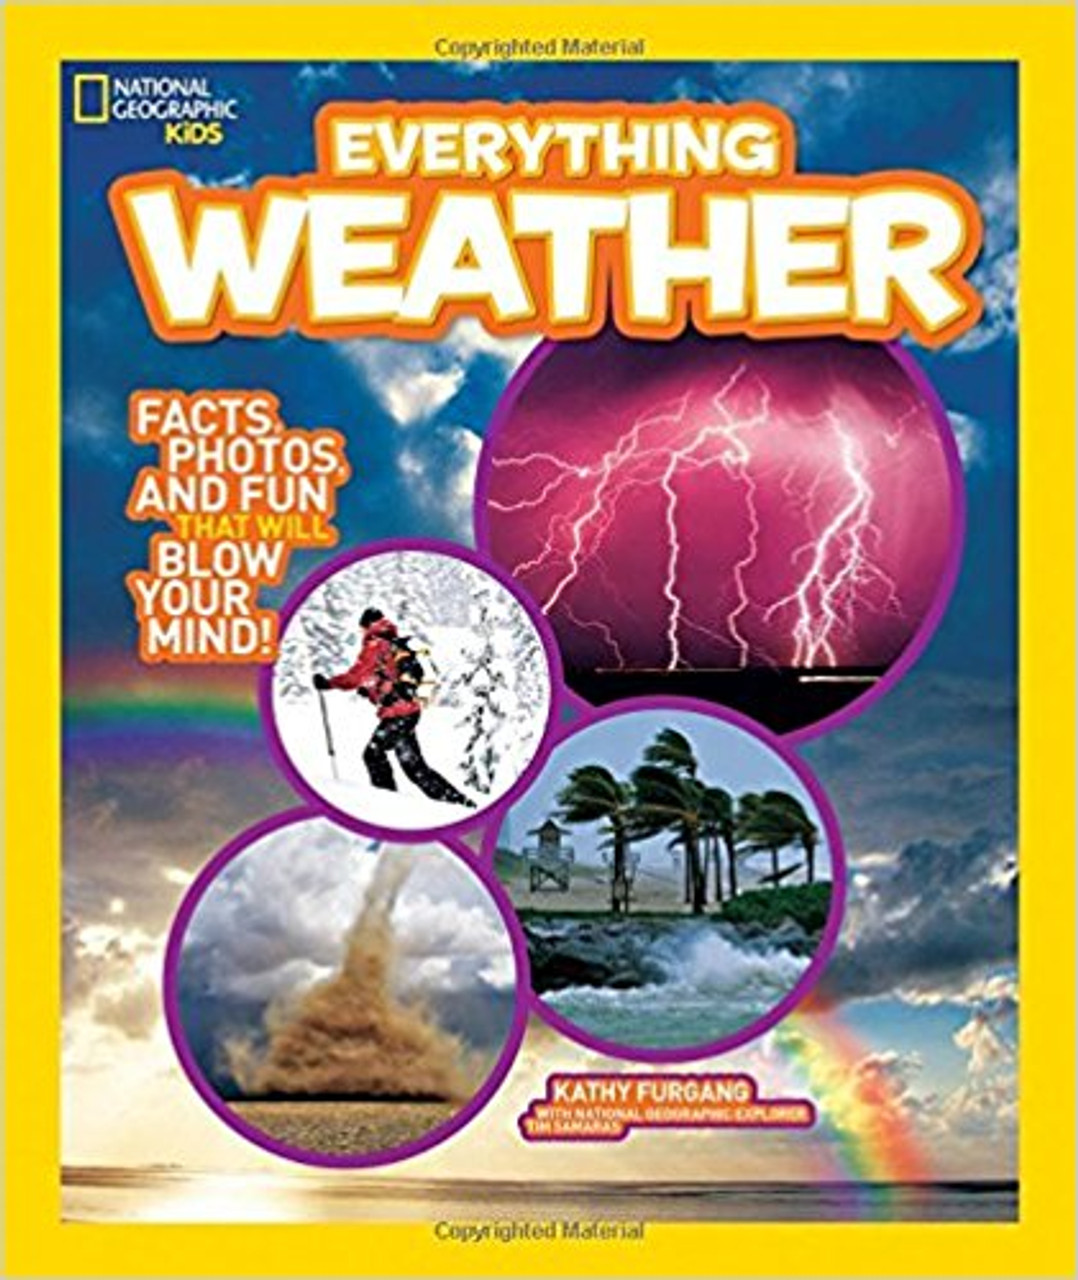 Everything Weather: Facts, Photos, and Fun That Will Blow You Away by Kathy Furgang